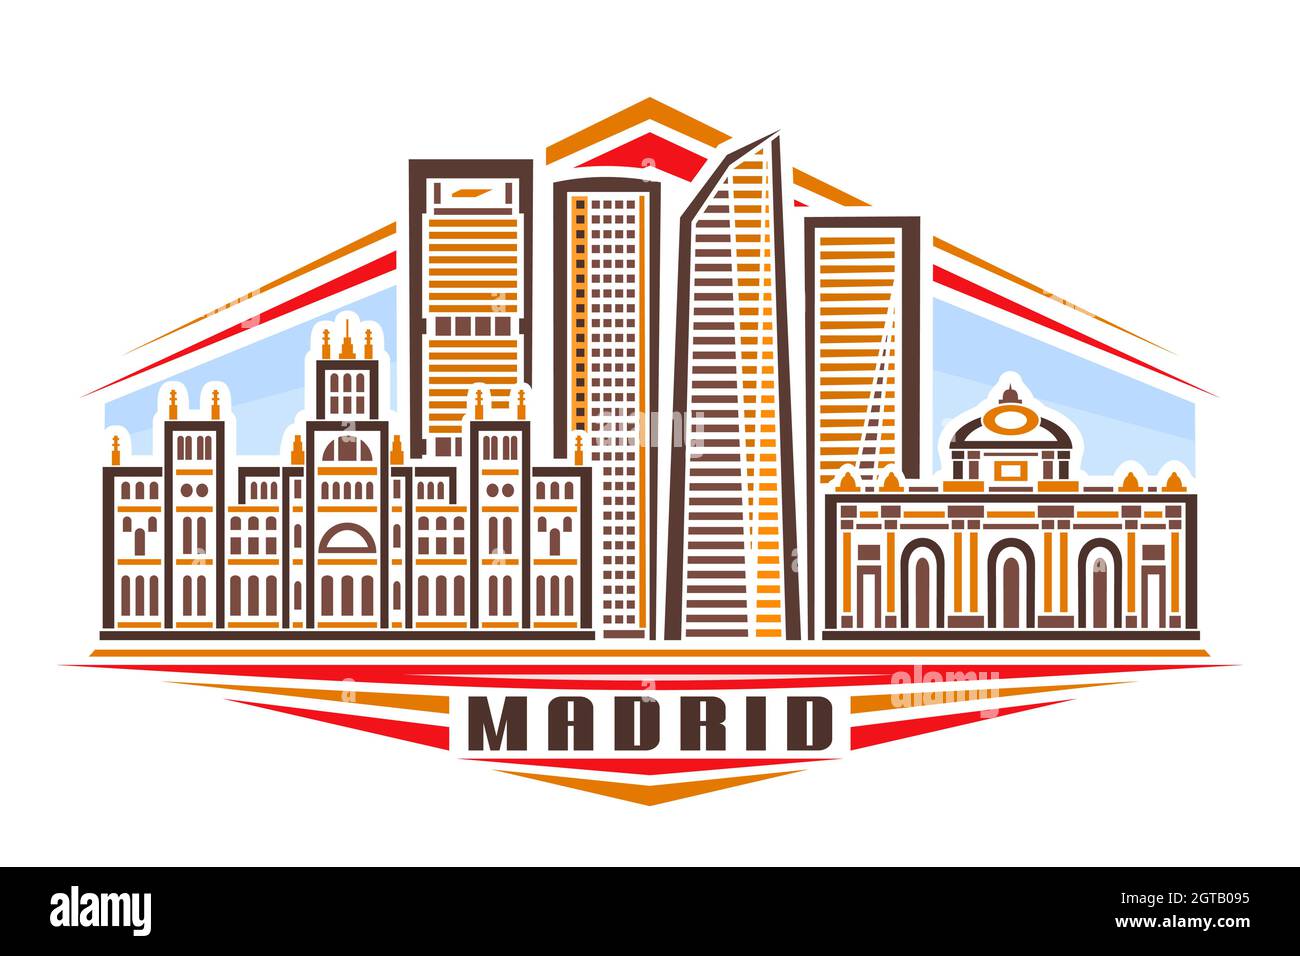 Vector illustration of Madrid, horizontal poster with linear design european madrid city scape on day sky background, urban line art concept with deco Stock Vector